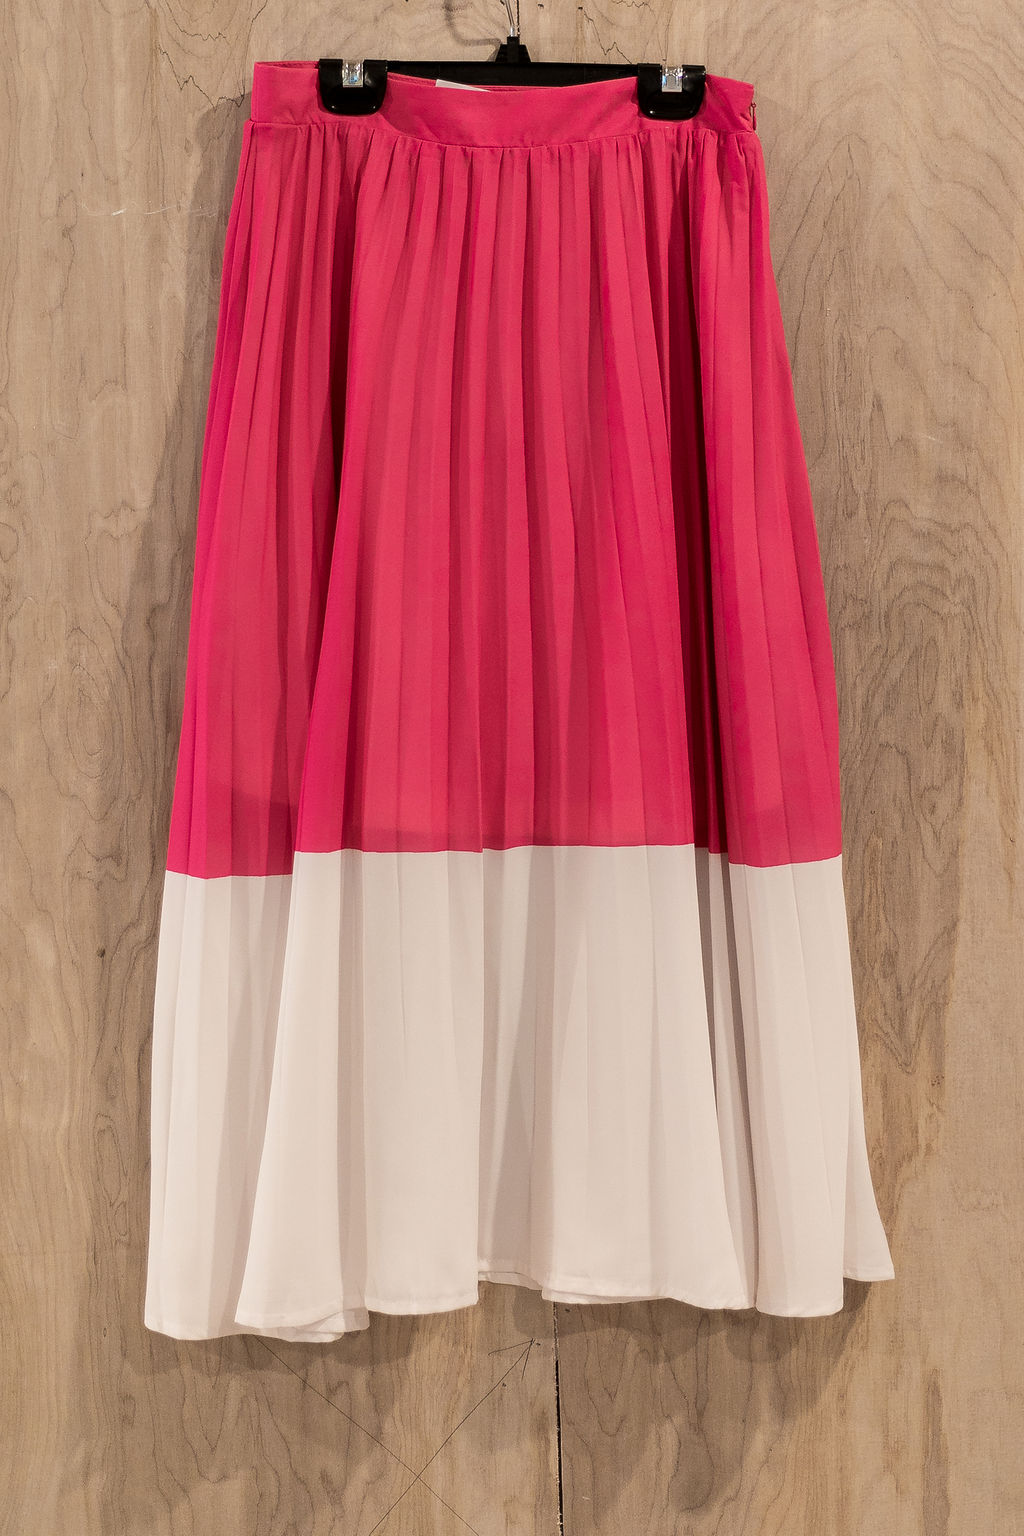 Bright Outlook Color Block High Waist Pleated Midi Skirt in Hot Pink - Giddy Up Glamour Boutique